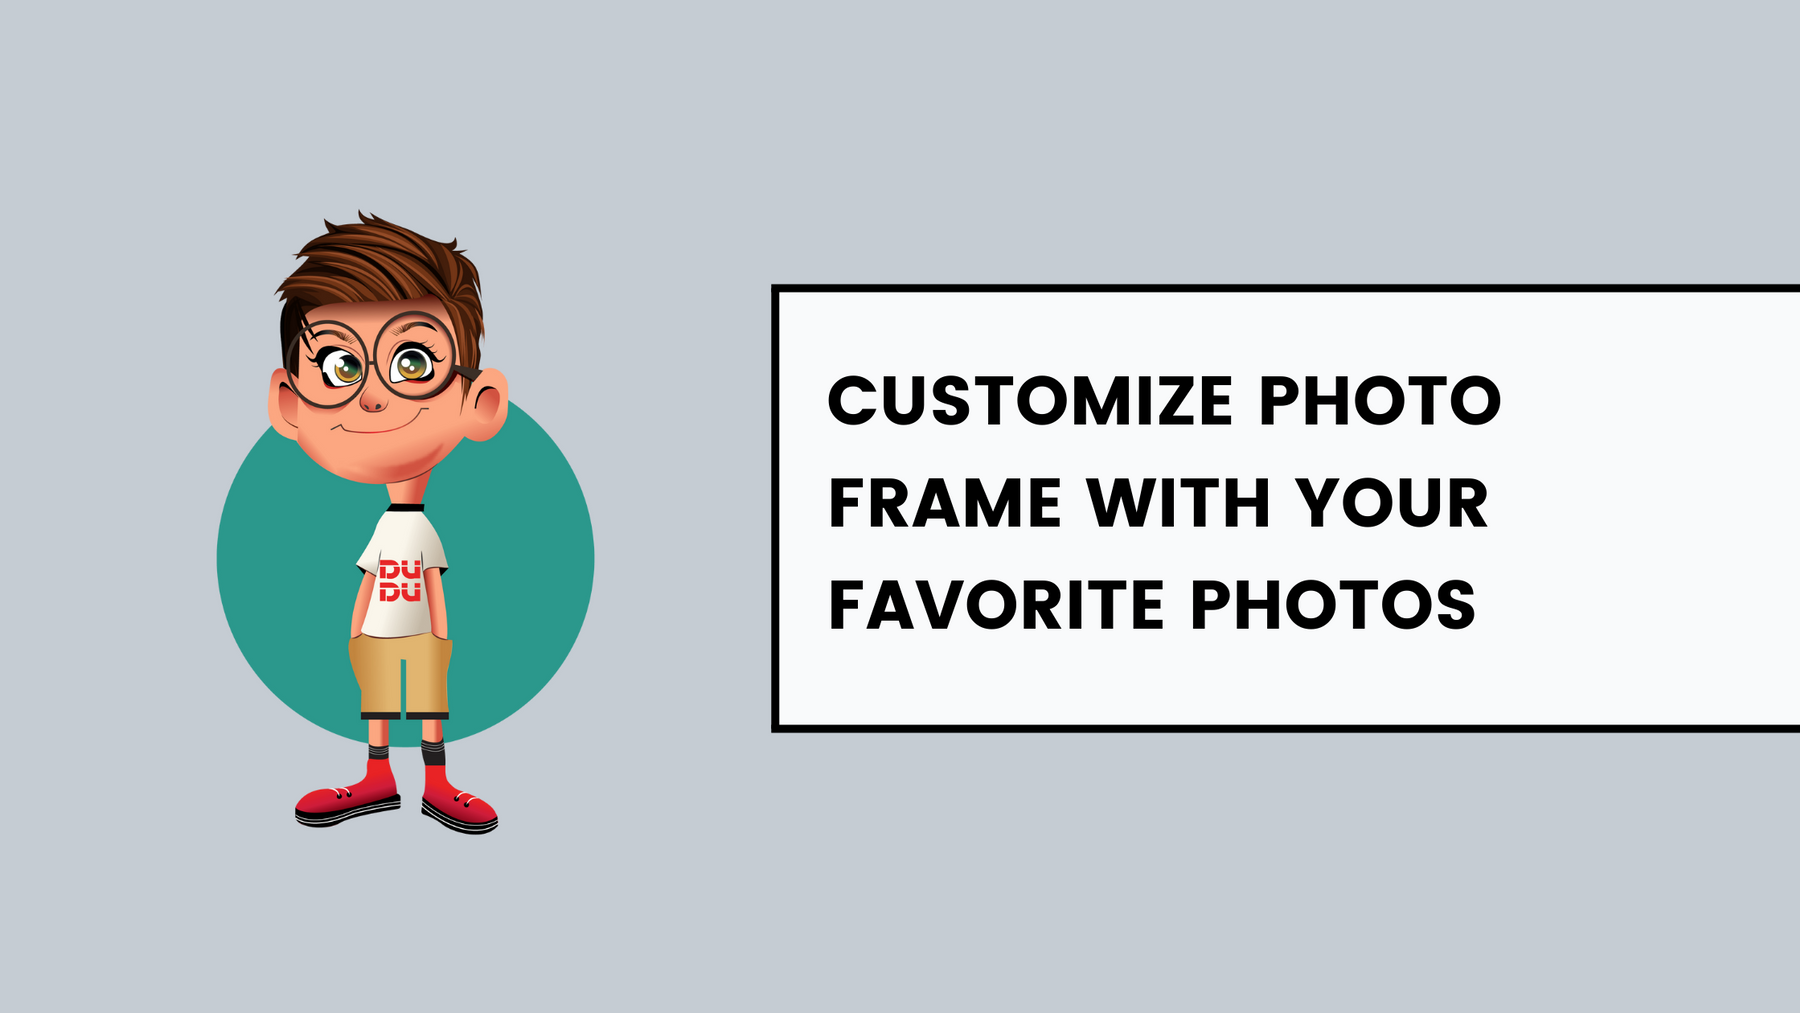 Customize Photo Frame with Your Favorite Photos